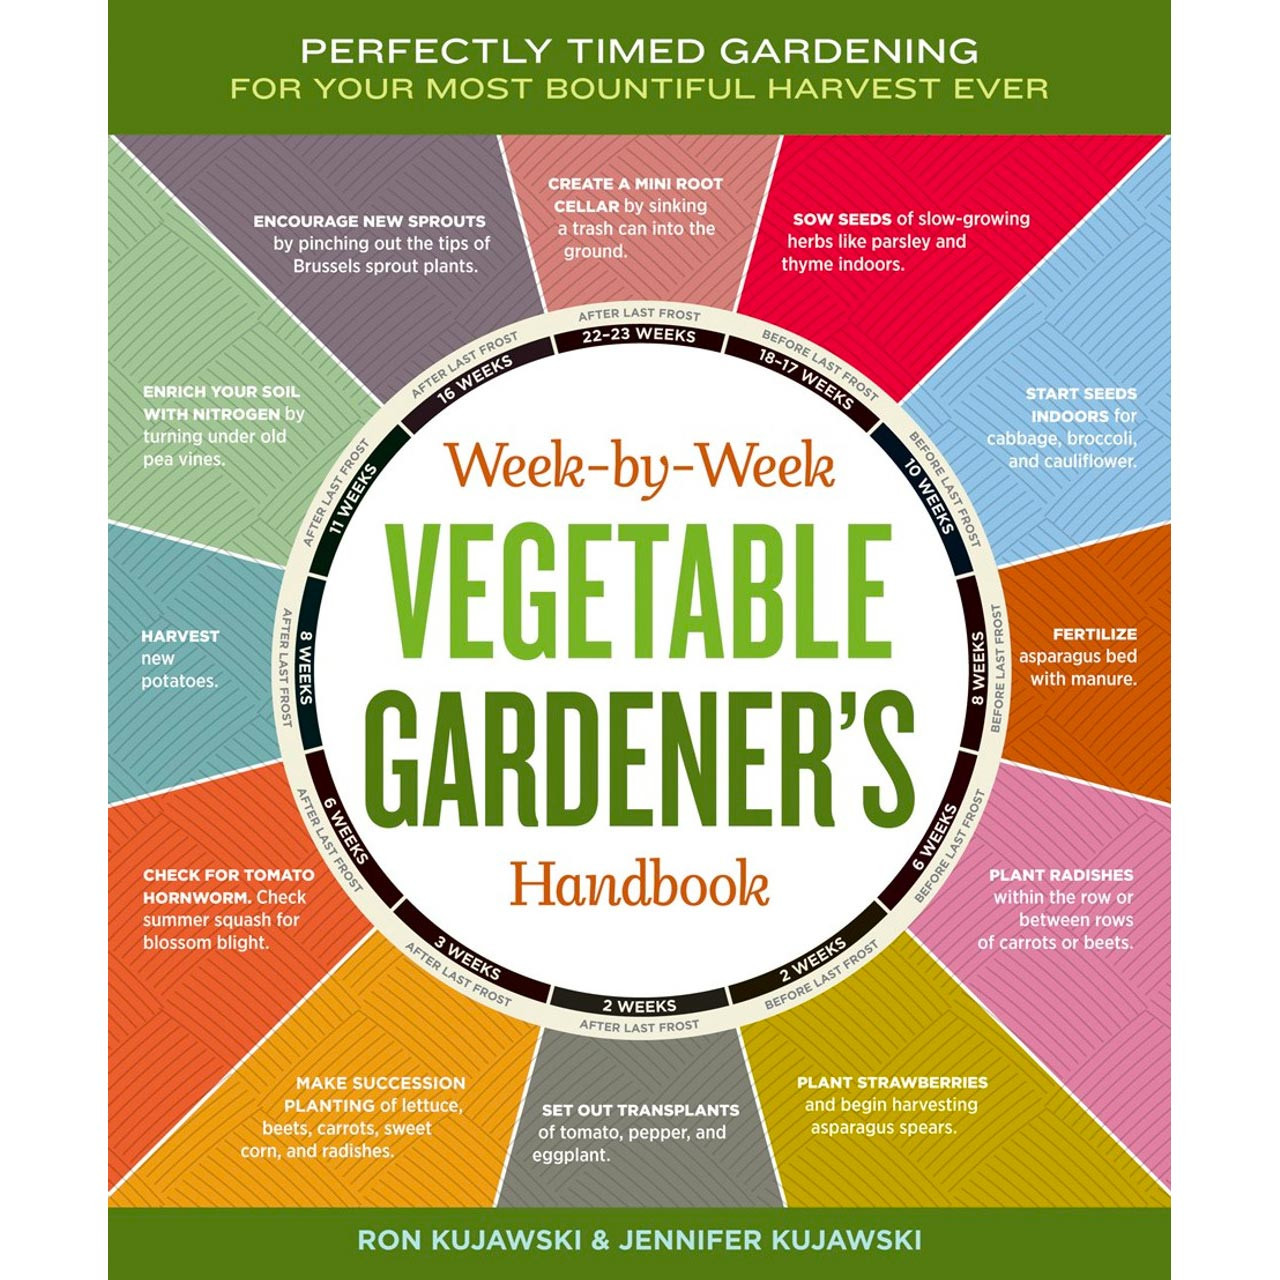 Week-by-Week Vegetable Gardener's Handbook: Perfectly Timed Gardening for Your Most Bountiful Harvest Ever